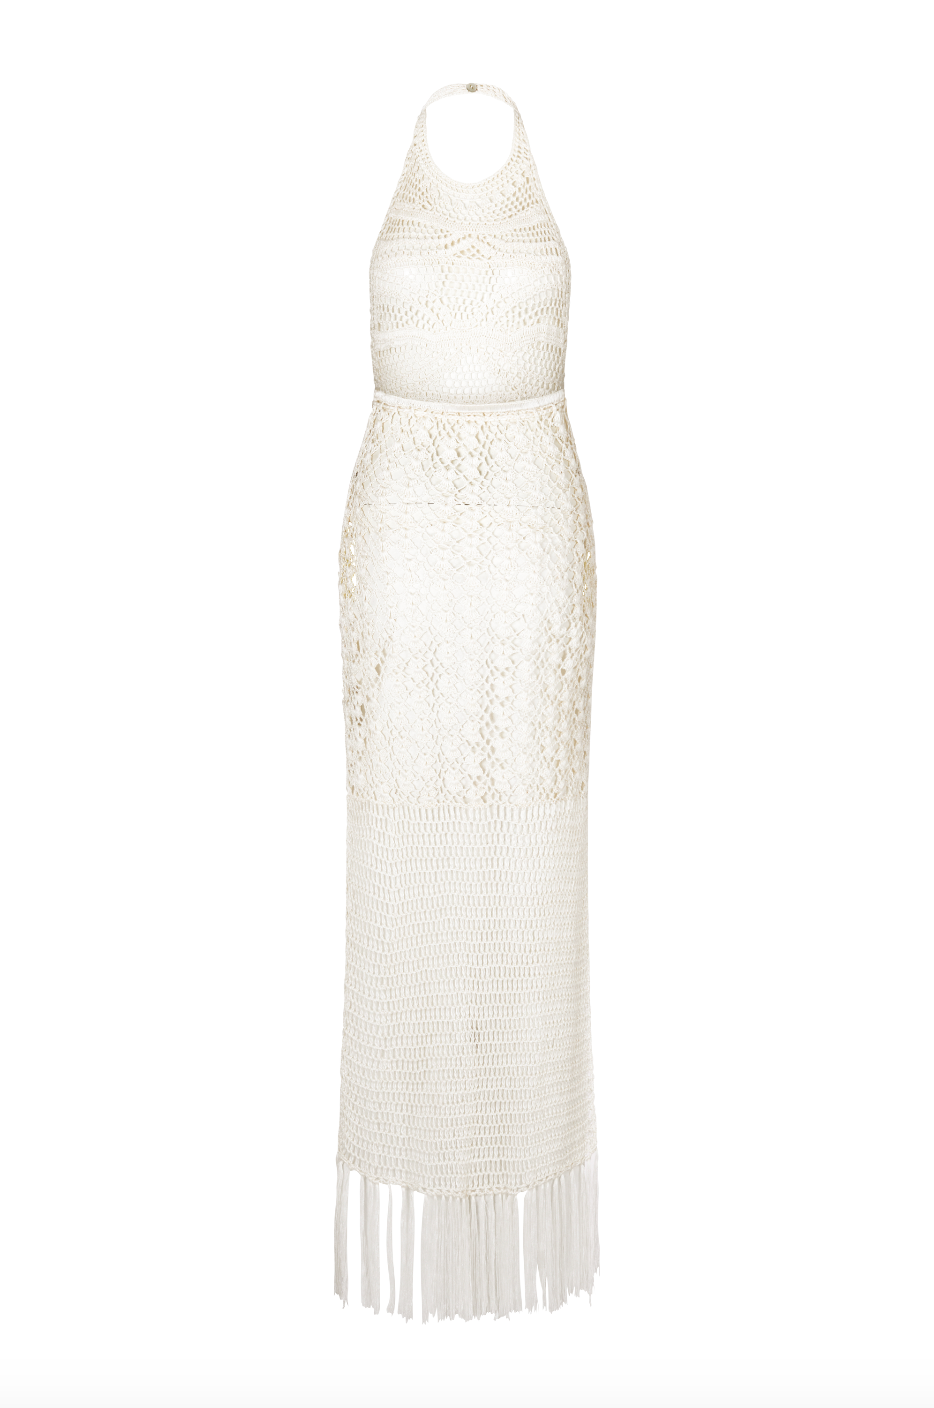 flook the label zaria maxi dress white crochet product image back